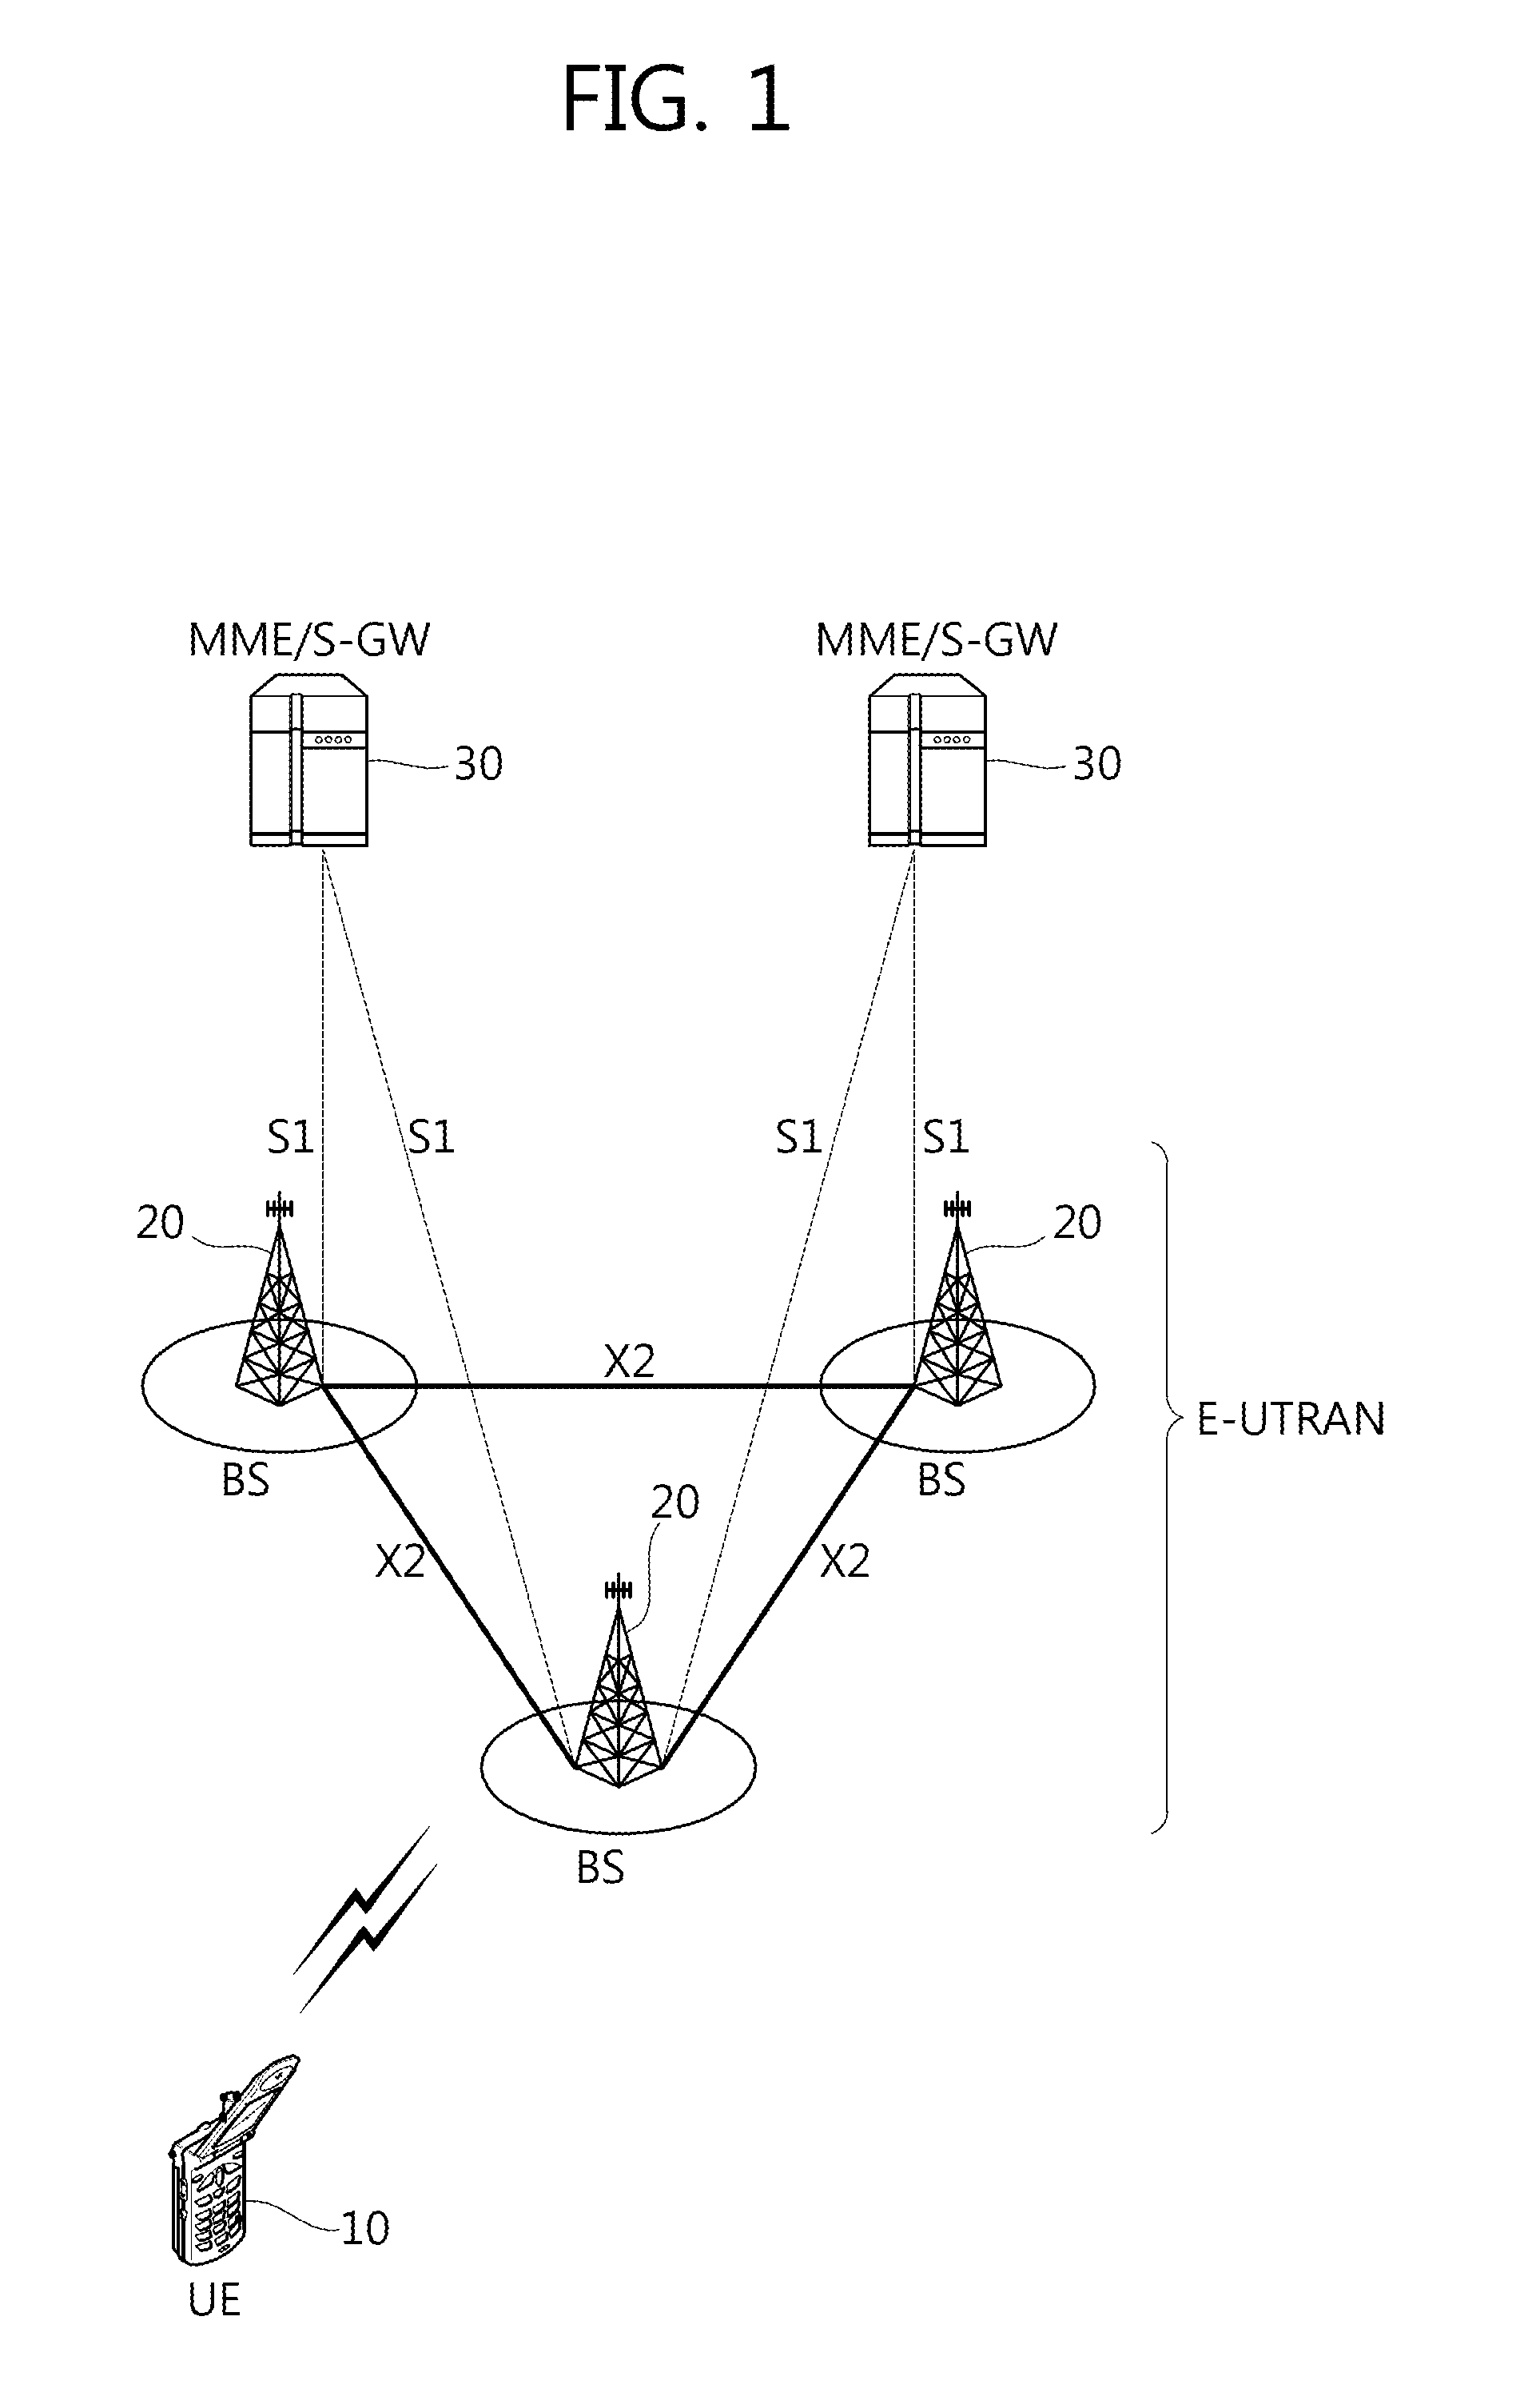 Method and Apparatus for Reporting a Logged Measurement in a Wireless Communication System